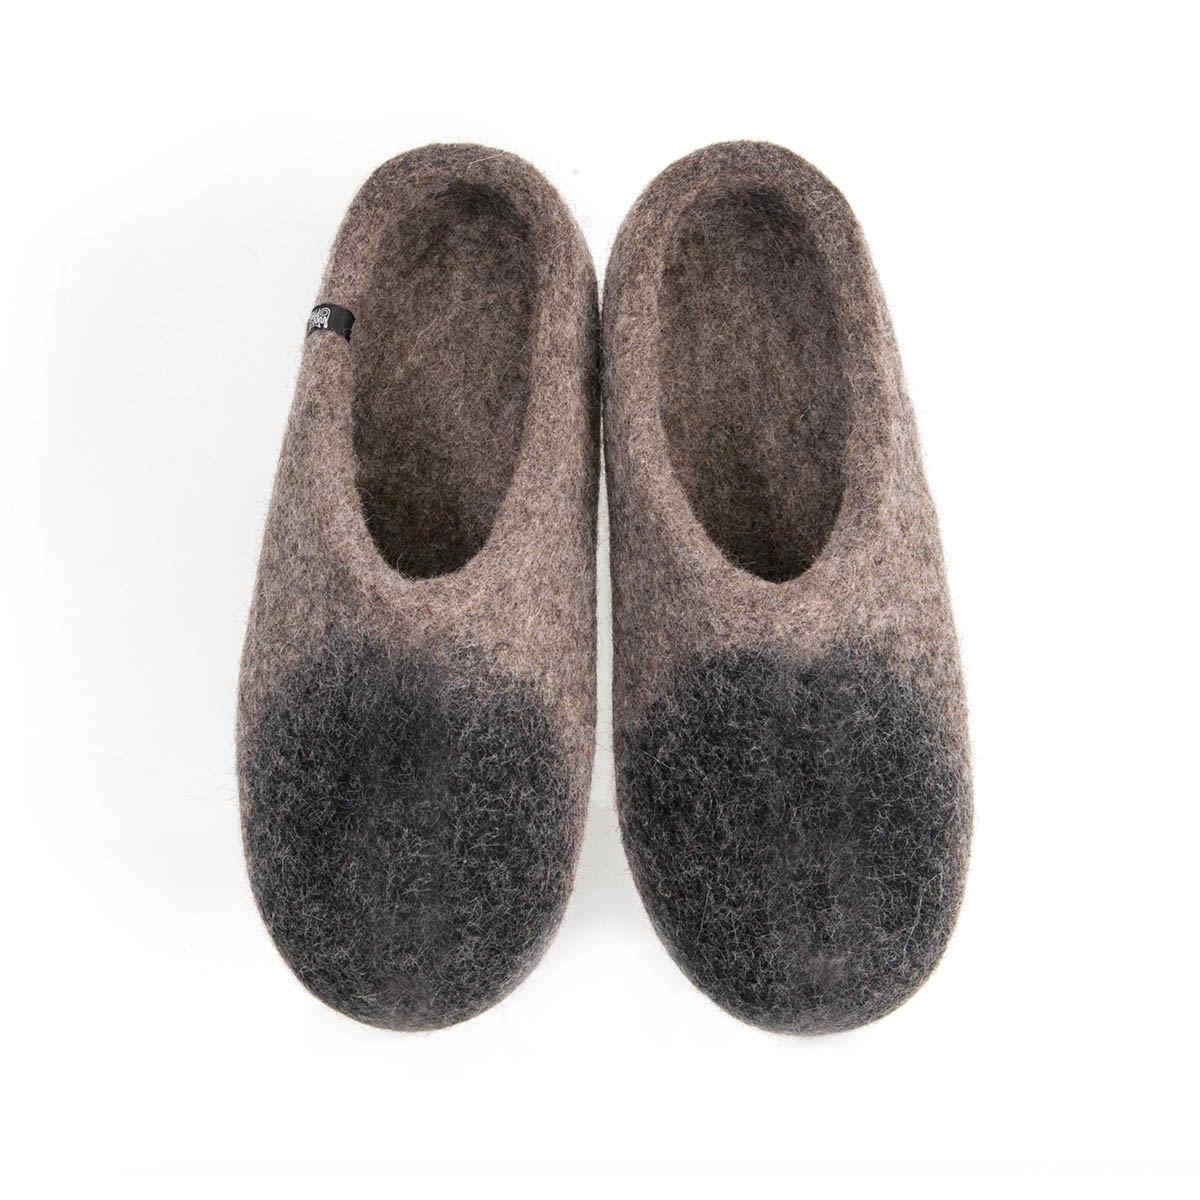 Mens slip on house shoes in natural 